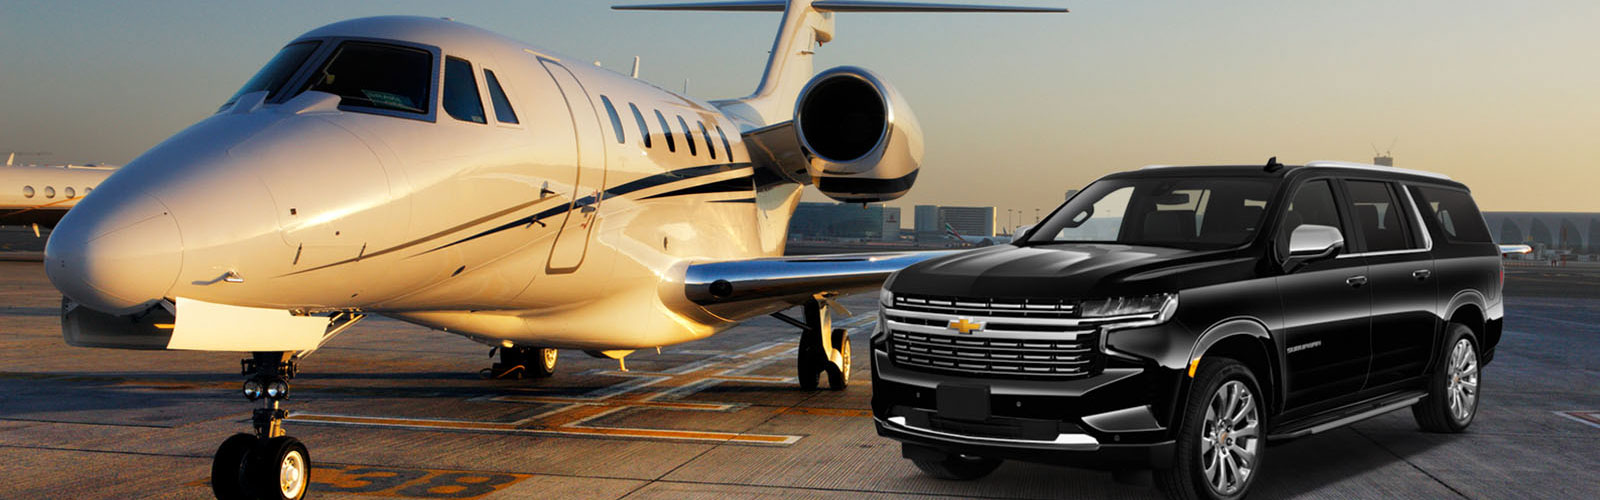 Airport Limo Service in Frisco TX